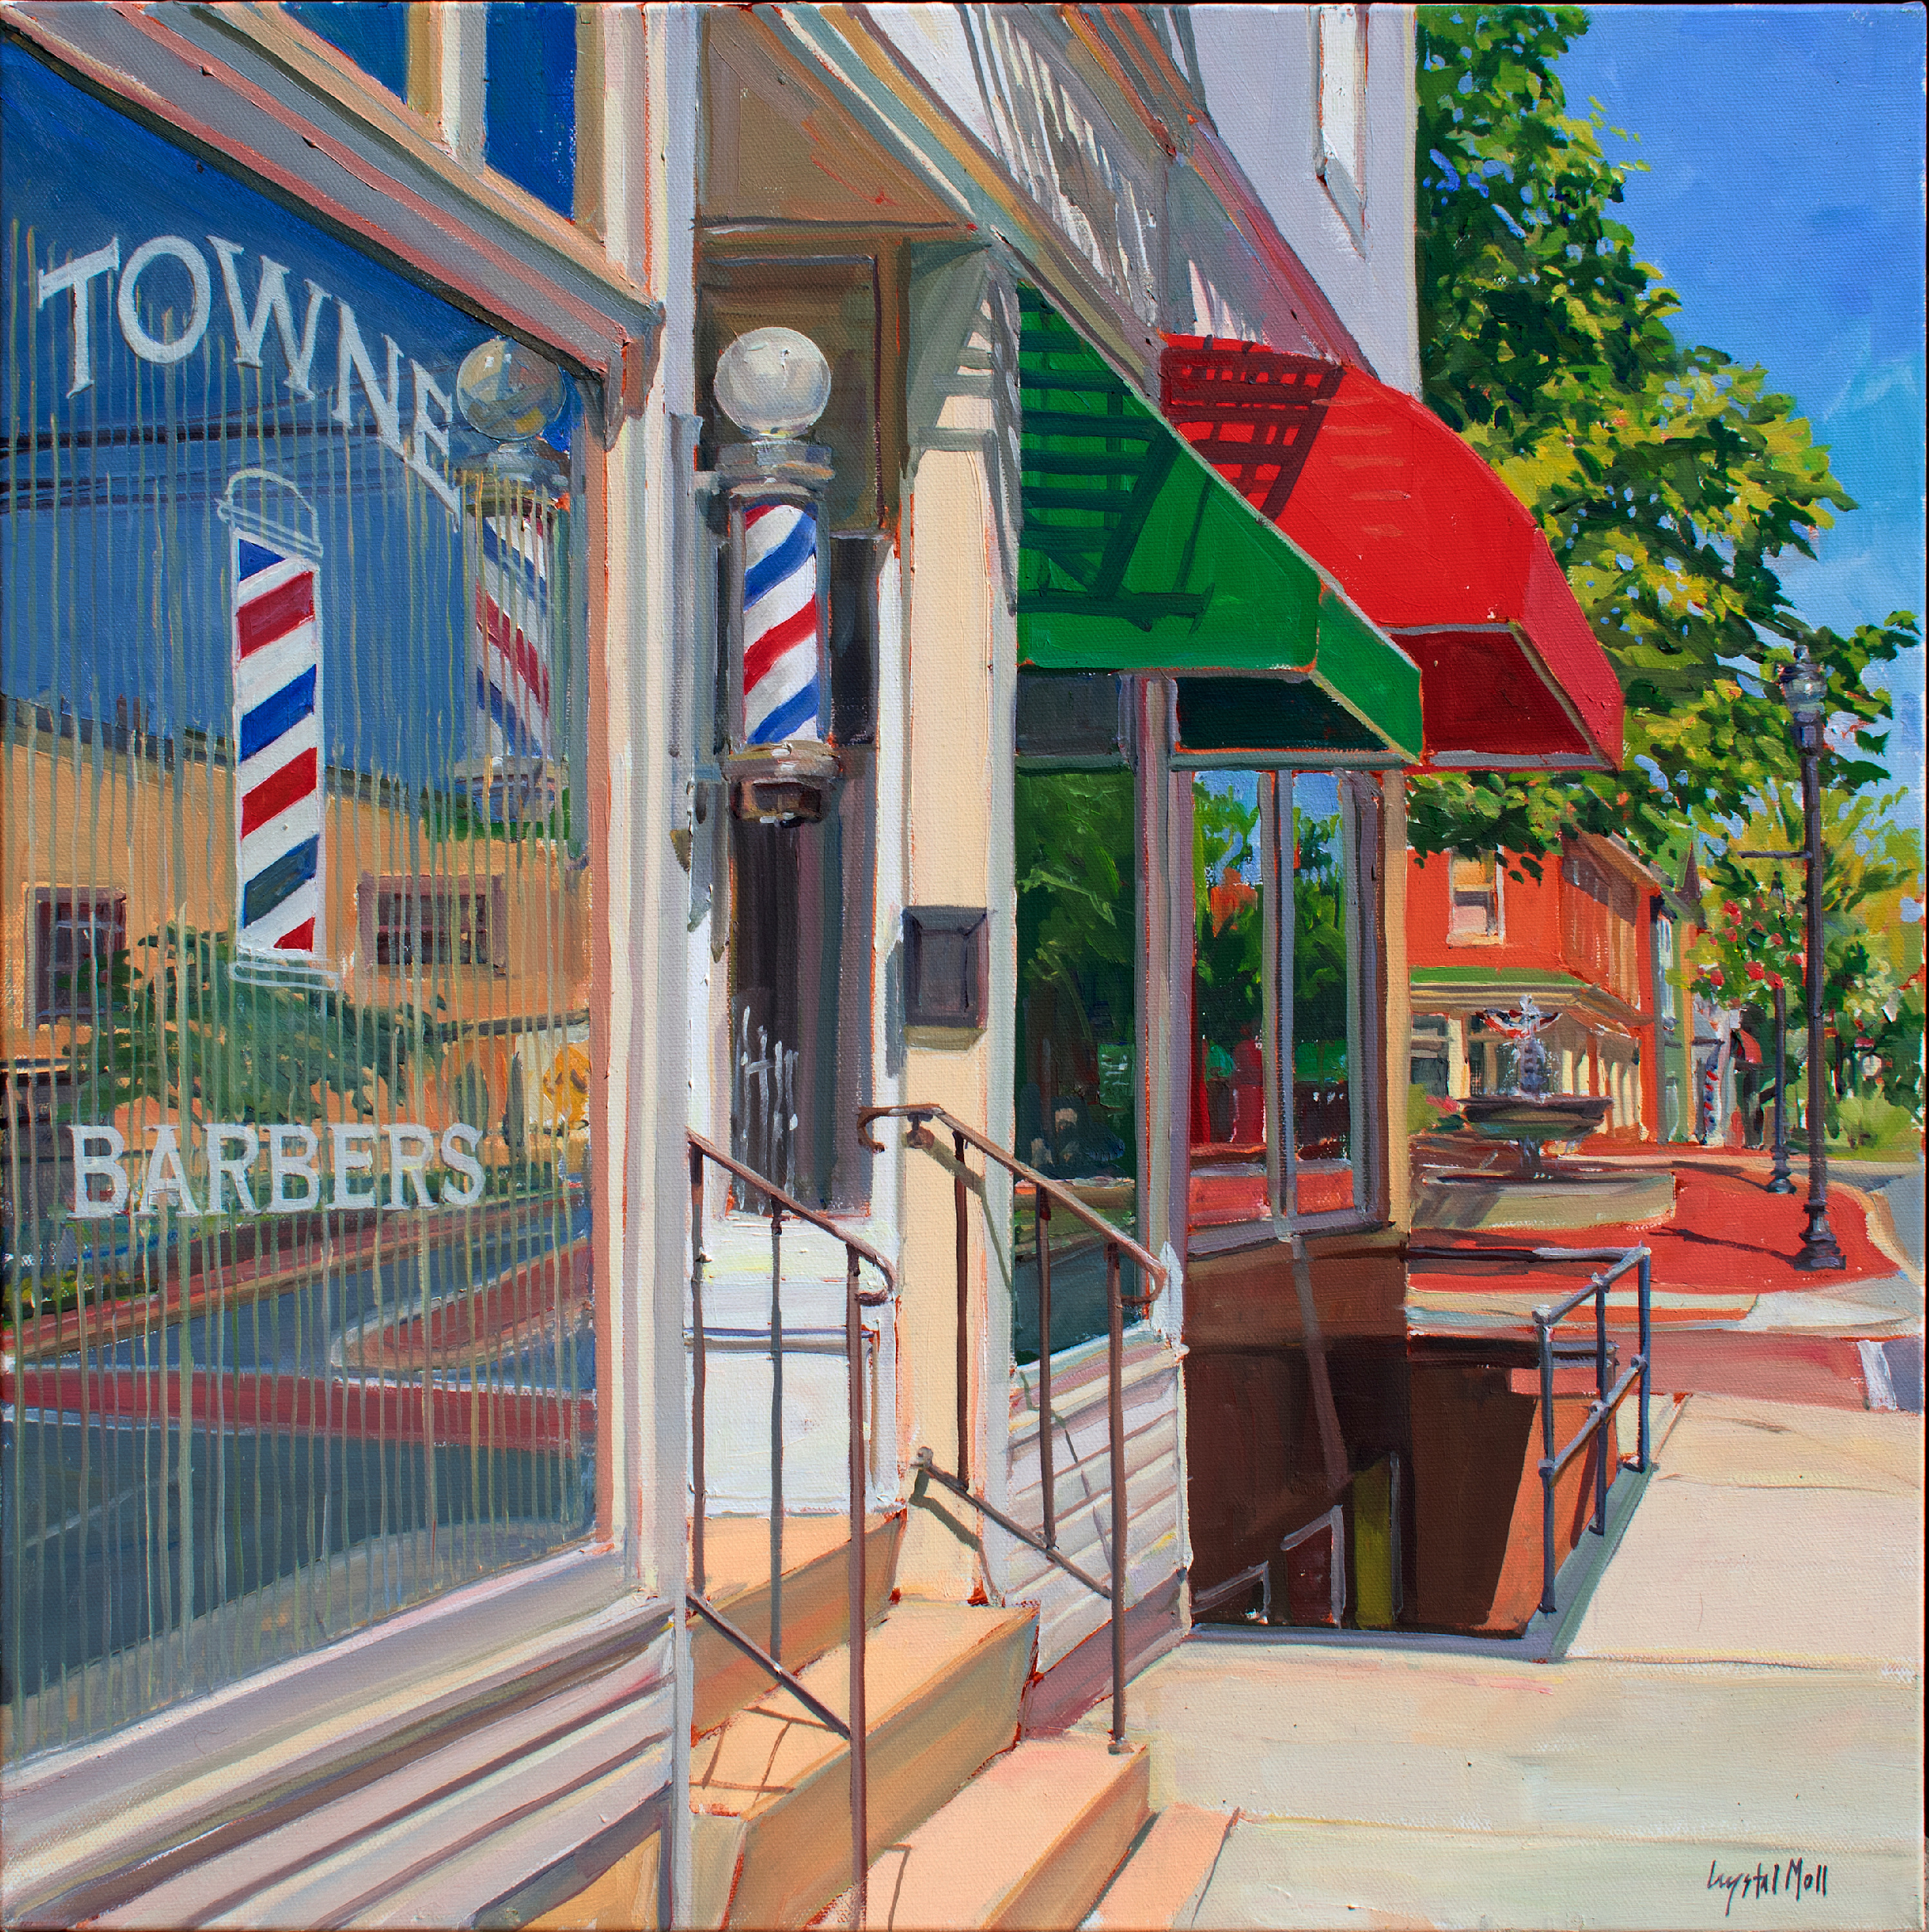 Towne barbers 20x20 by crystal moll 2800 lcf4v6